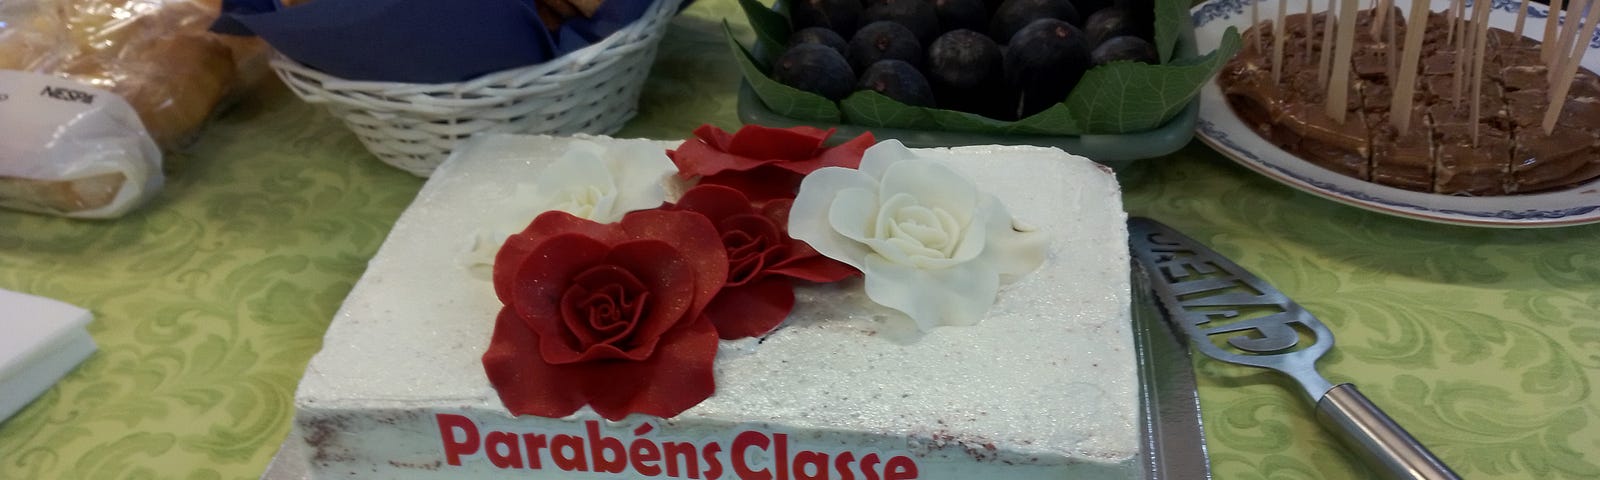 Buffet table with food. A white frosted cake with red roses that says “Parabens Classe 2023”